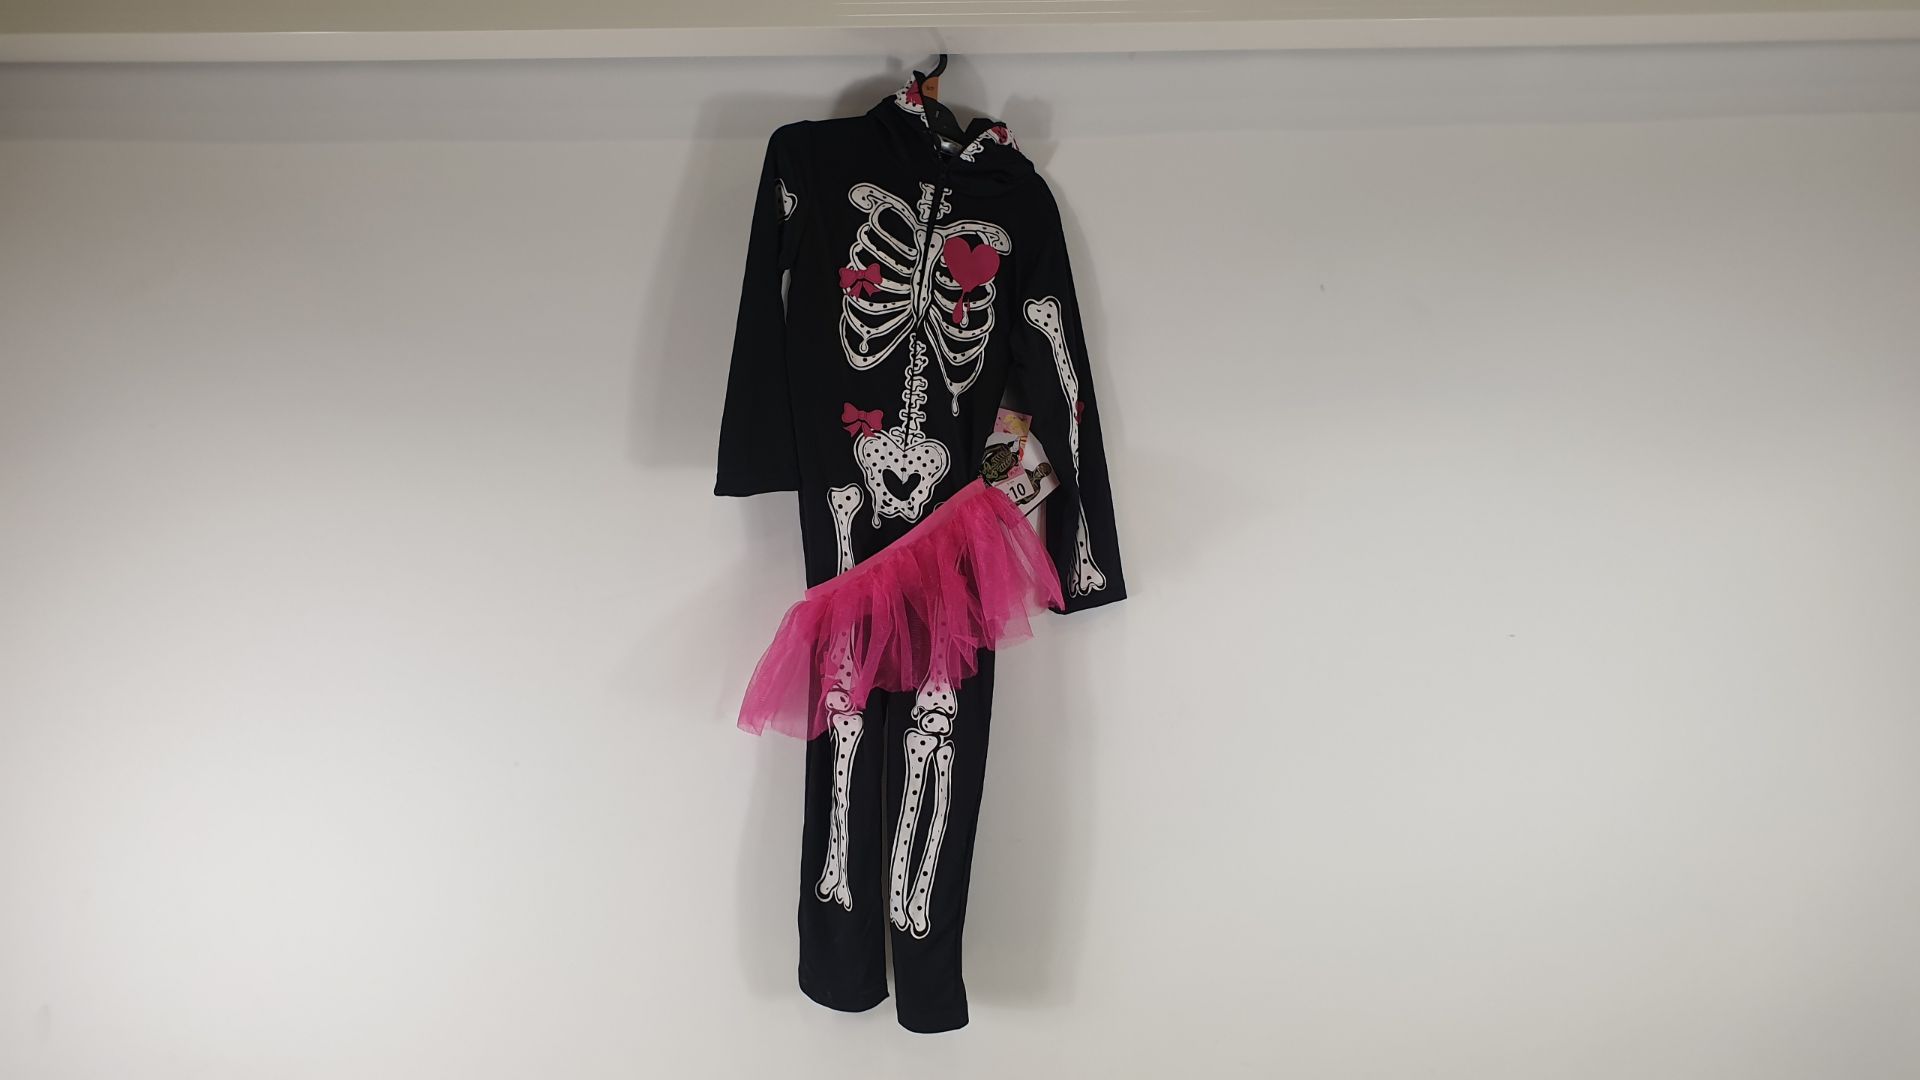 60 X BRAND NEW GIRLS SKELETON WITH PINK TUTU COSTUME WITH ZIP UP FACE HOOD - IN VARIOUS SIZES